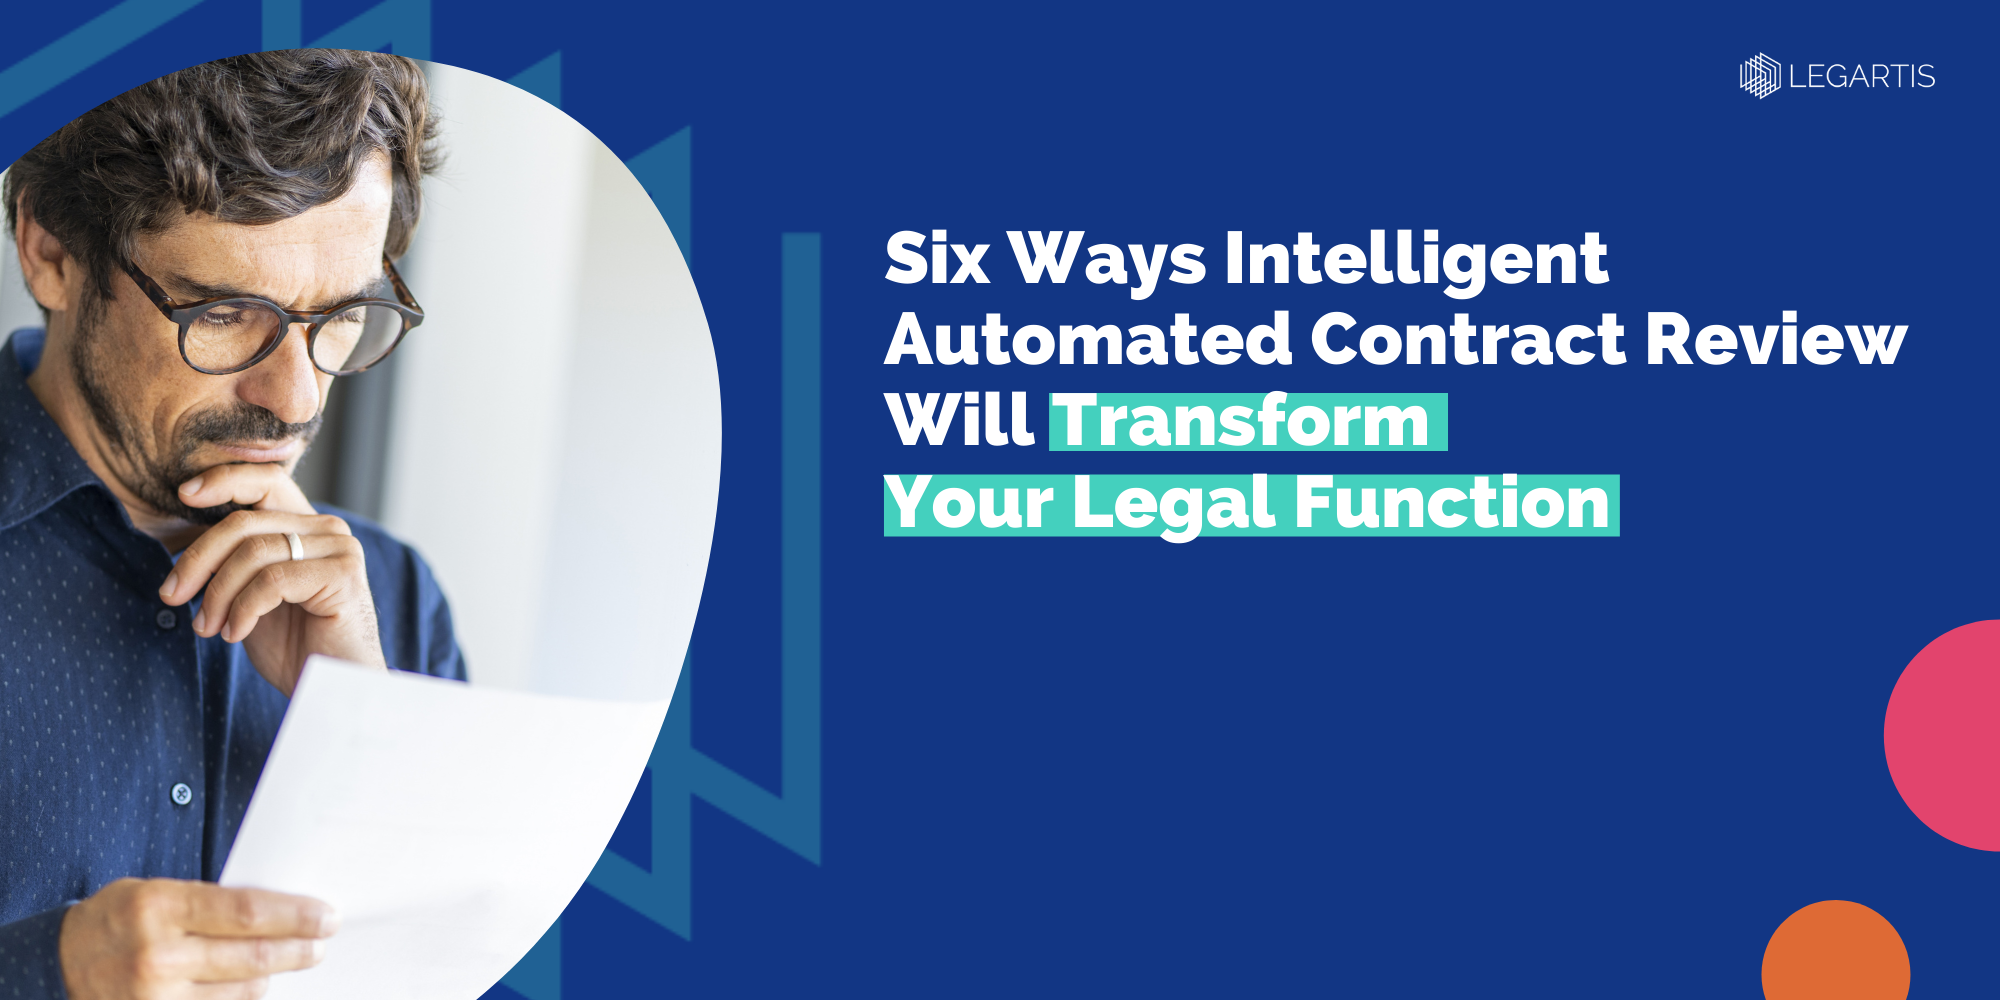 Title picture for blog how to transform legal function with automated contract review